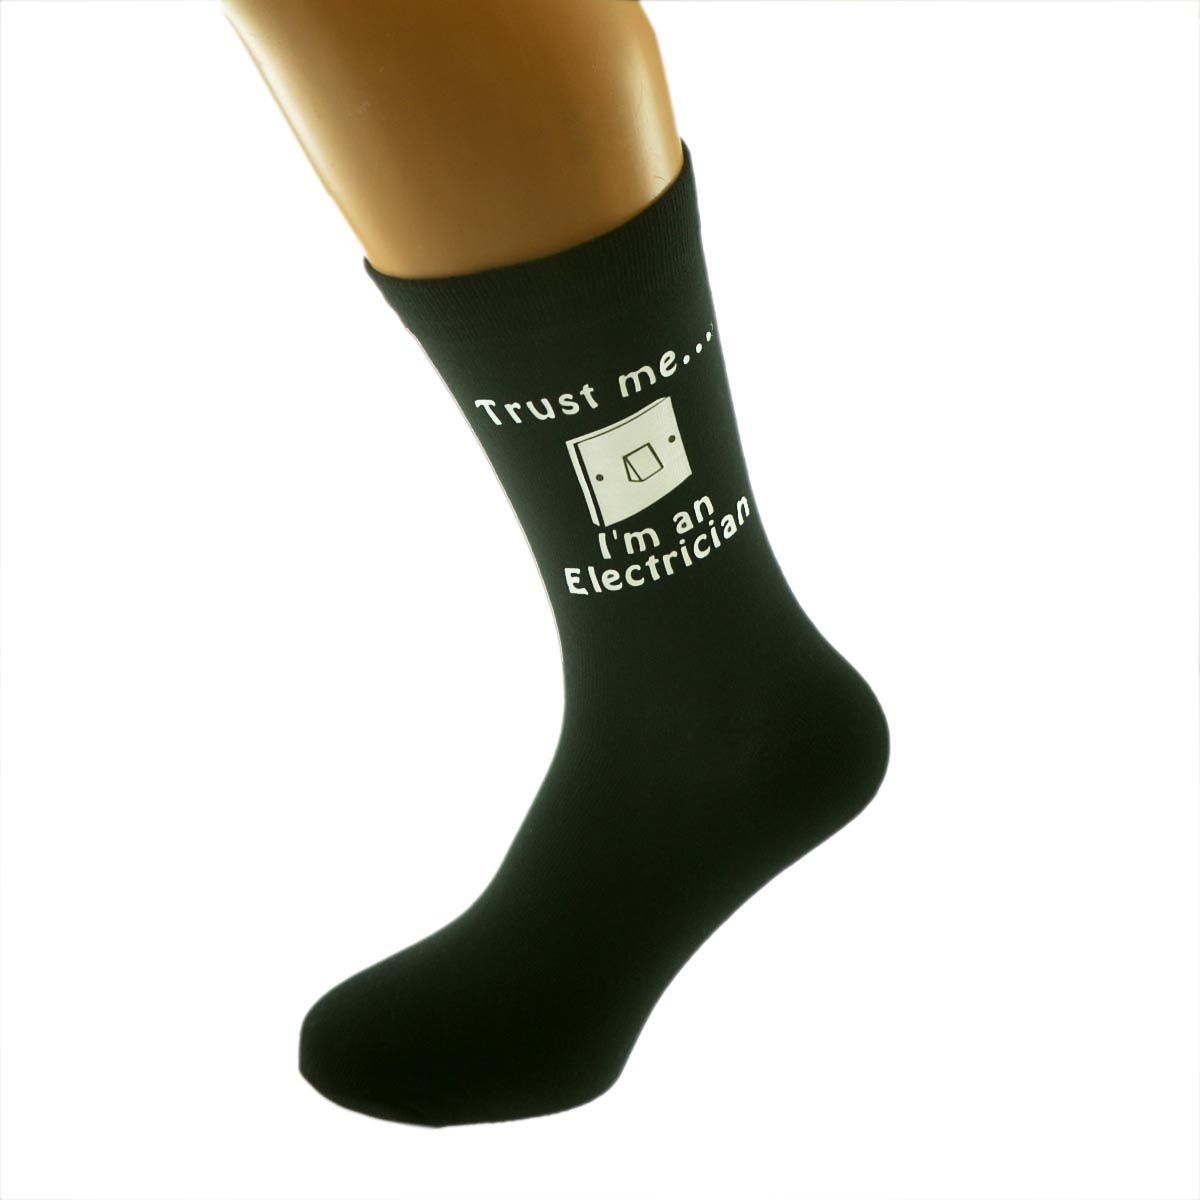 Trust me I'm an Electrician with Switch Image Mens Black Socks - Ashton and Finch